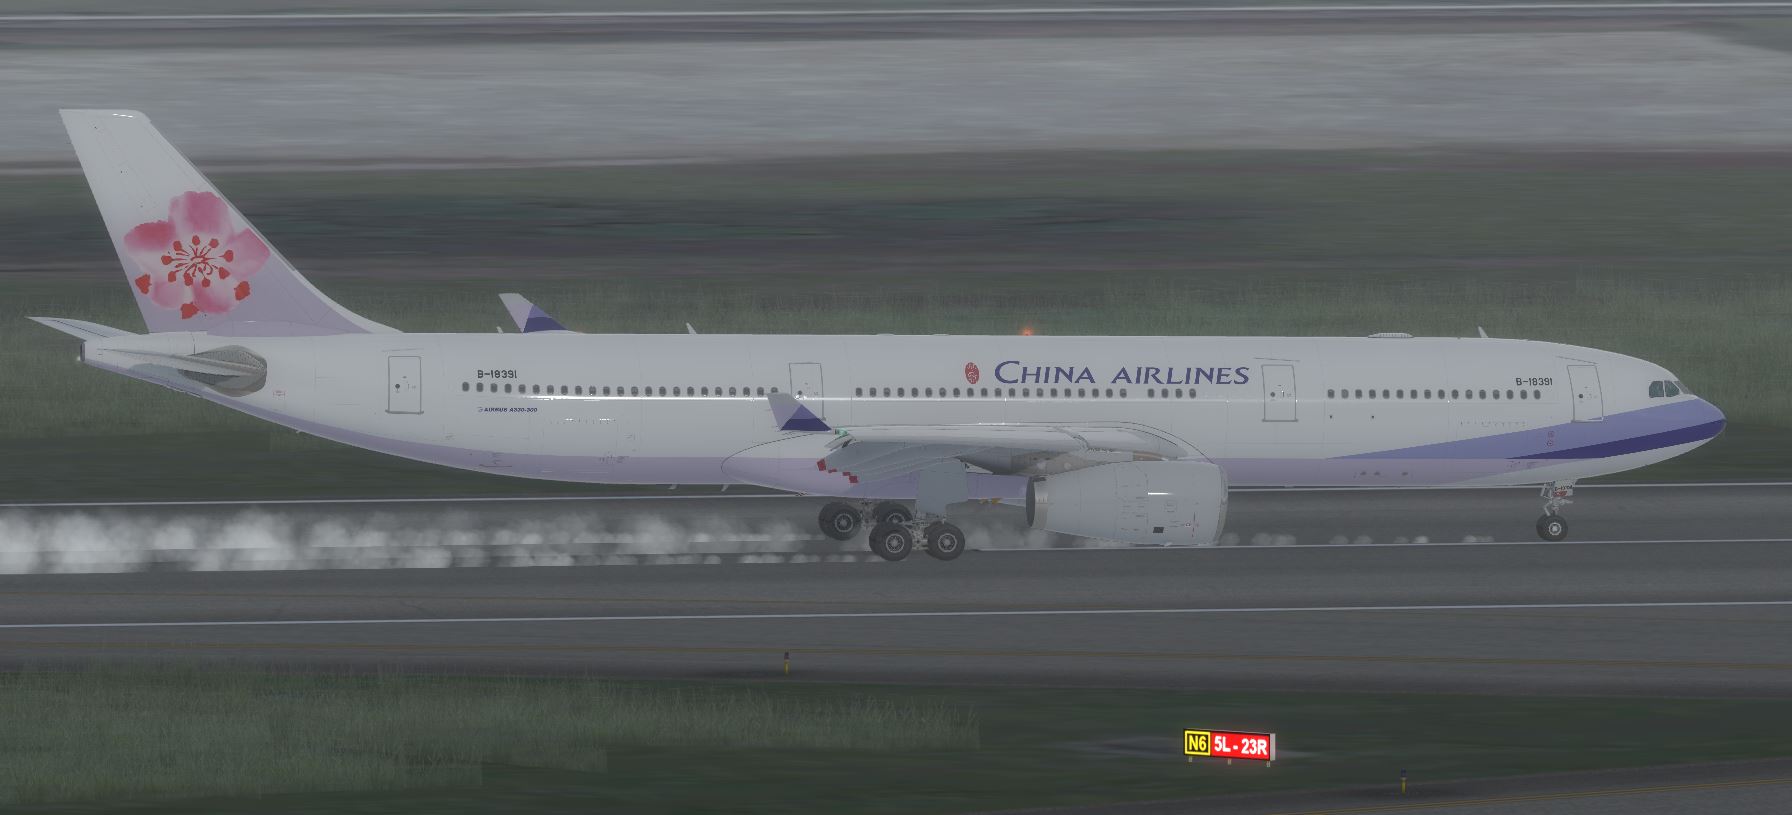 AS A330 ChinaAirline-3855 